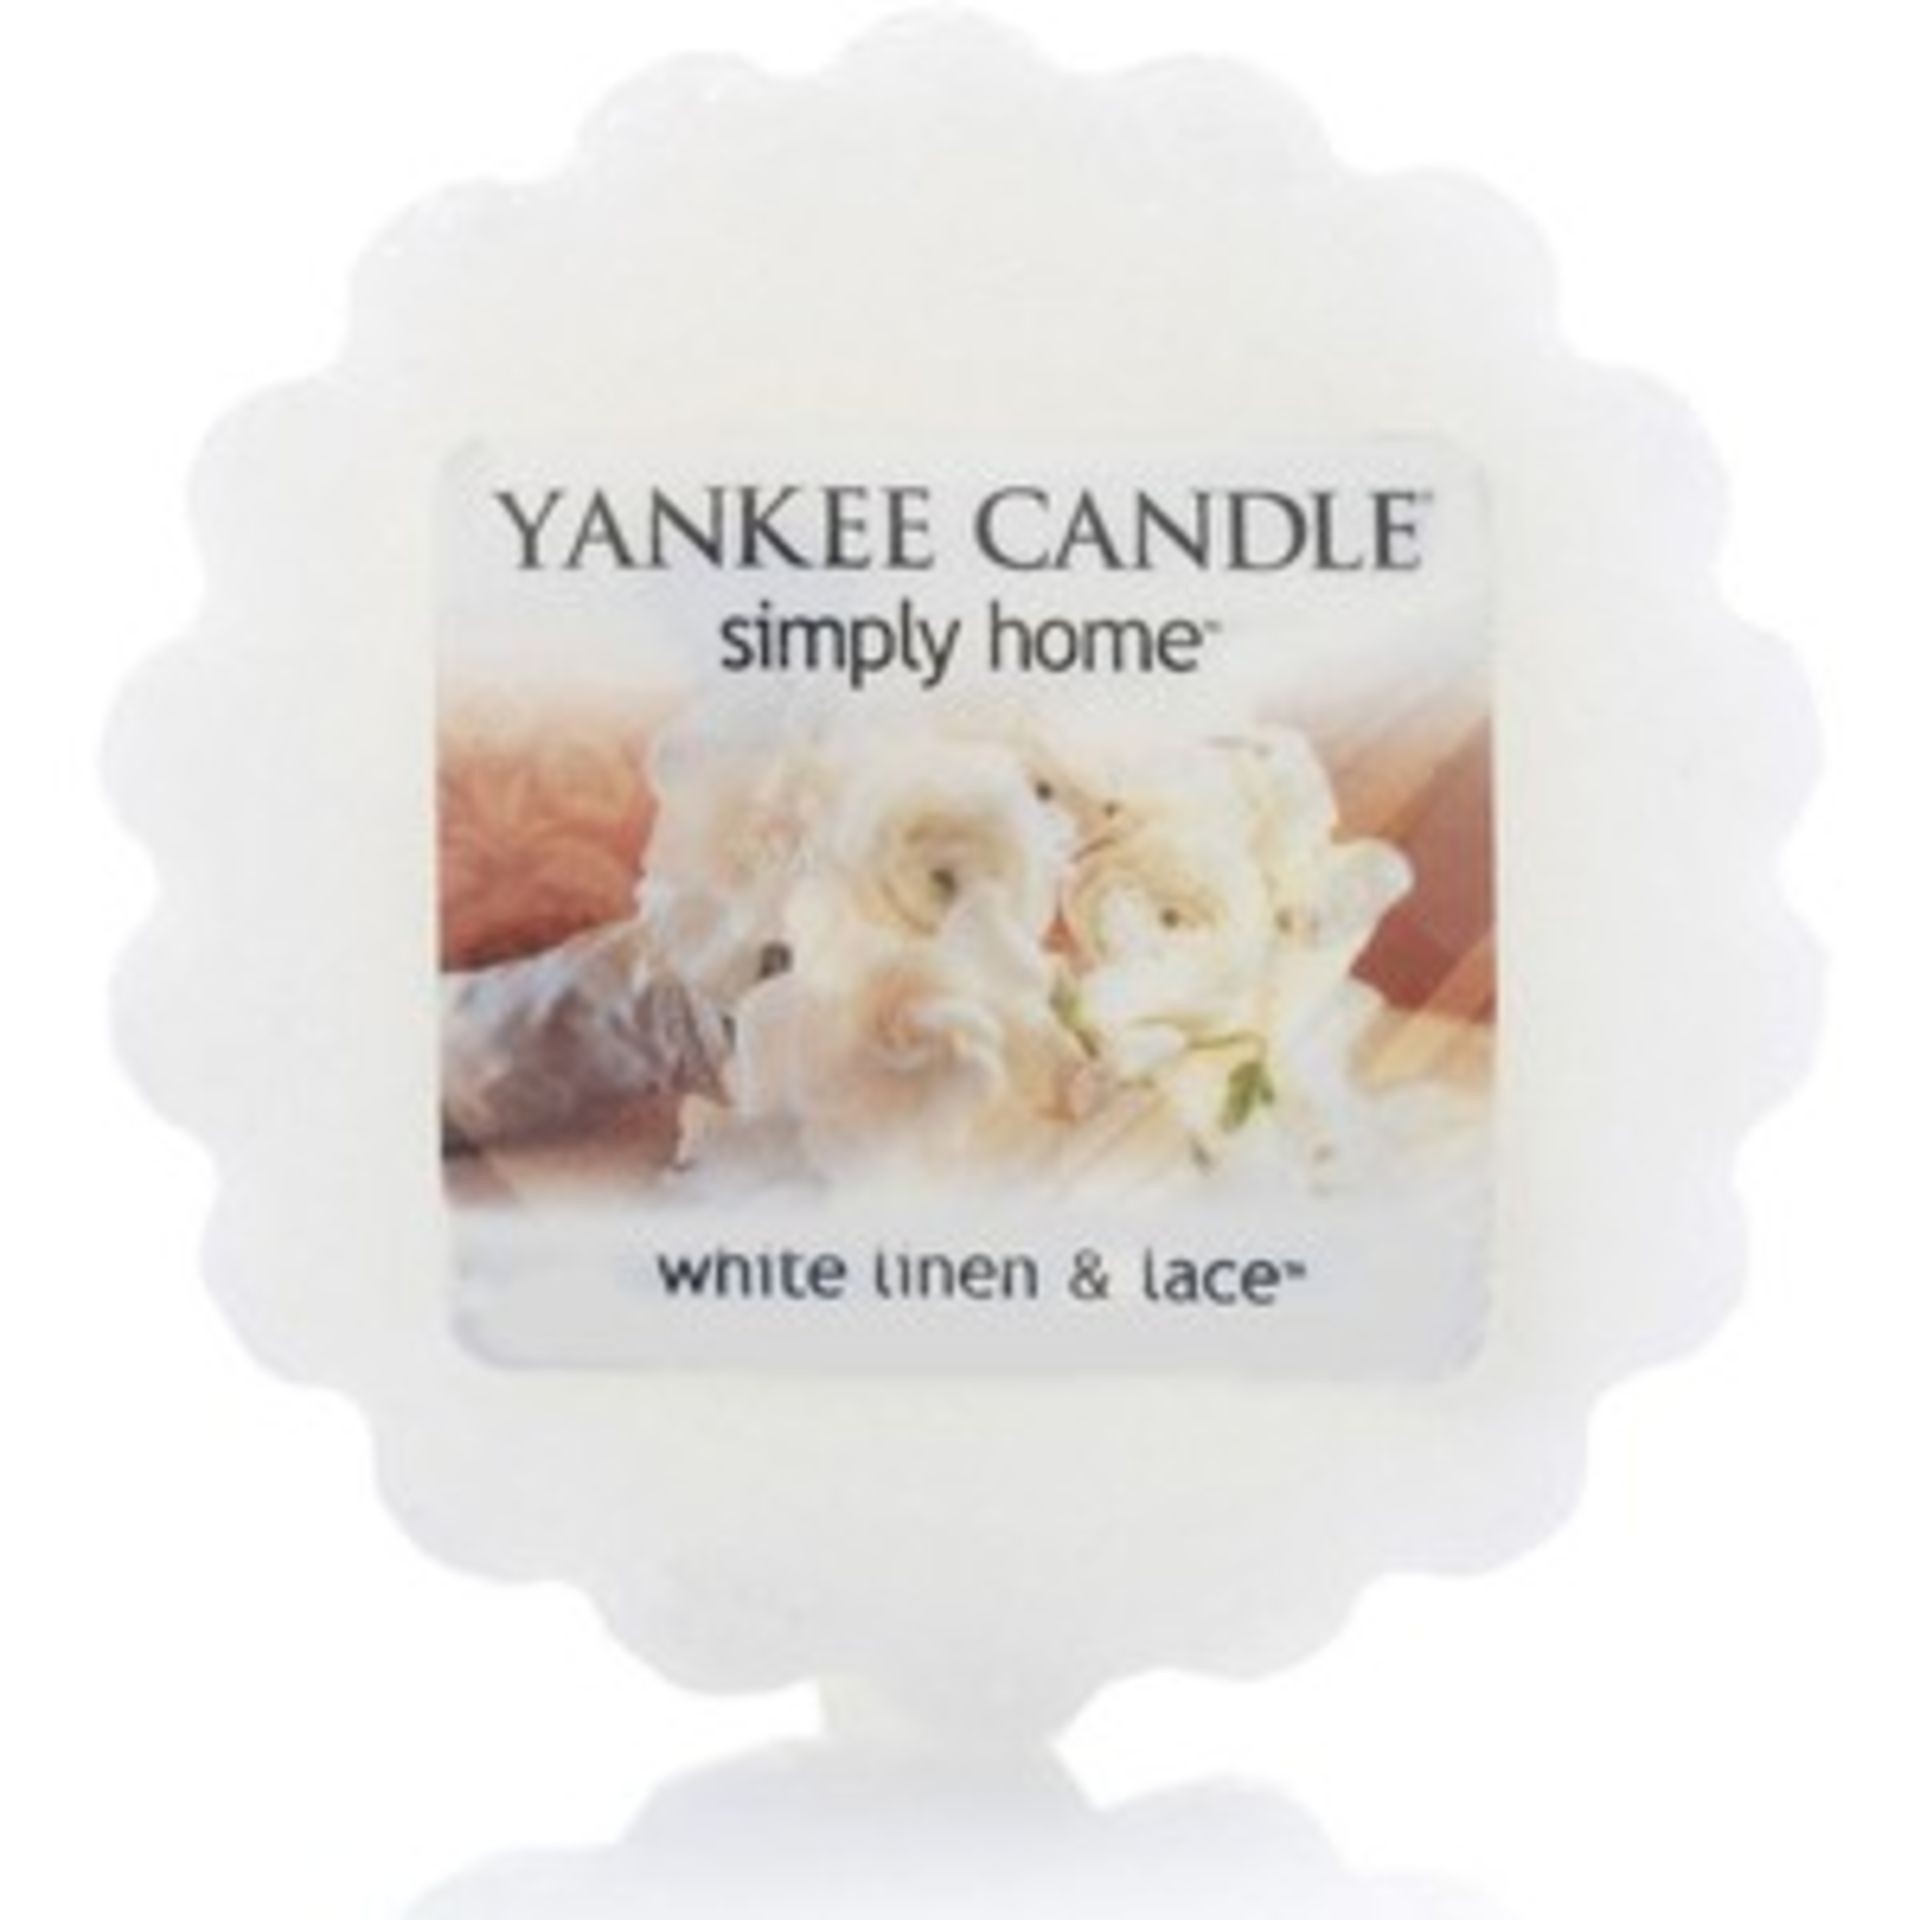 V Brand New 24 x Yankee Candle Tarts White Linen/Lace RRP: £35.76 X 2 YOUR BID PRICE TO BE - Image 2 of 2